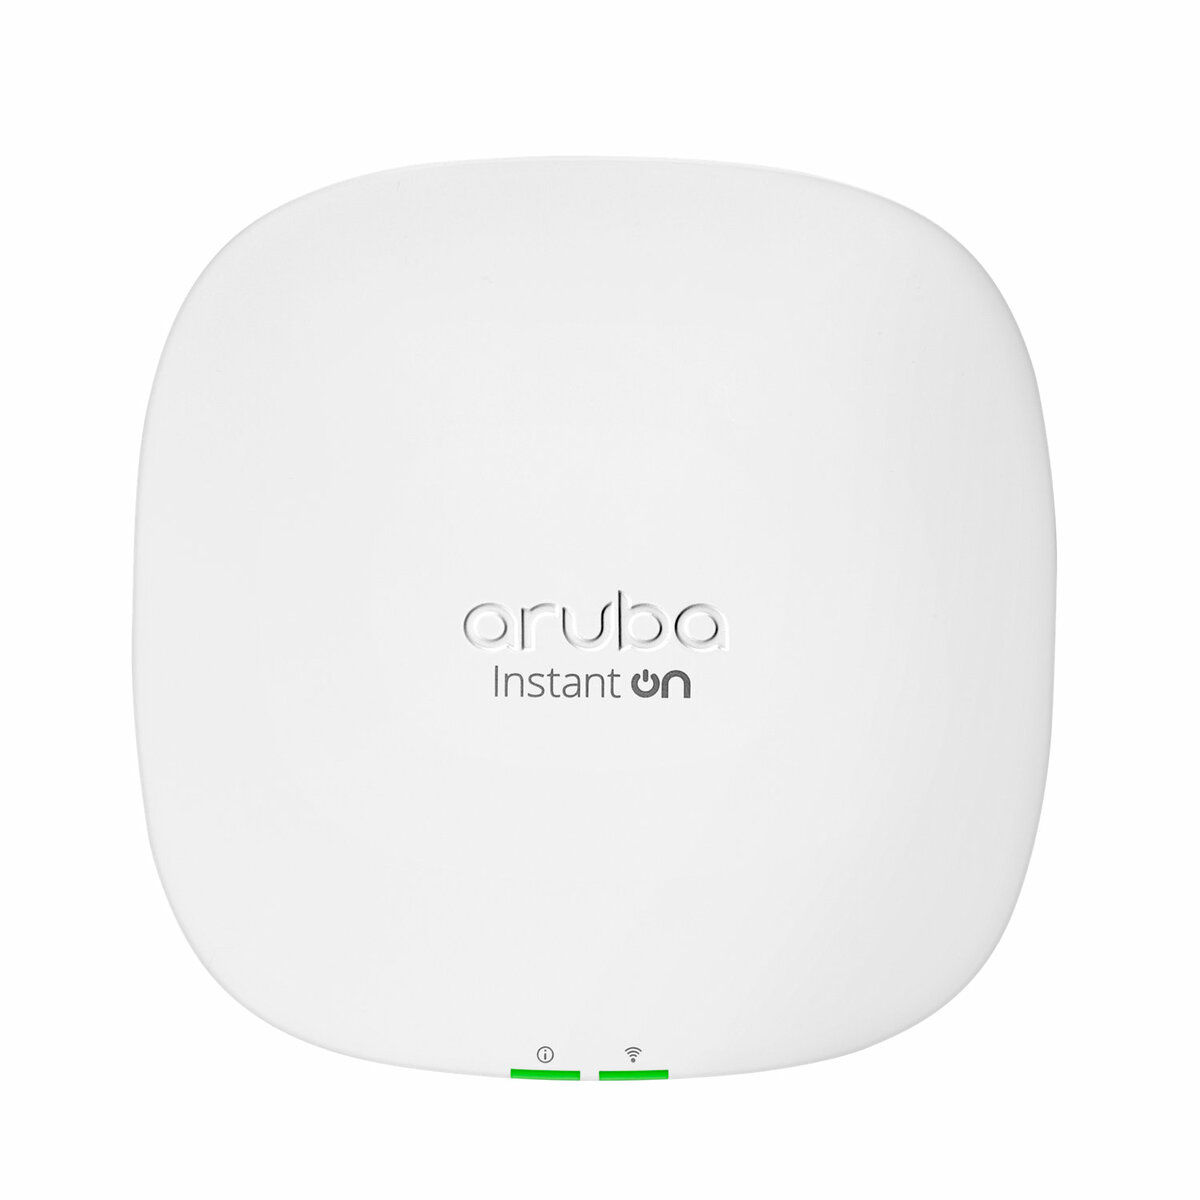 Access Points  HPE Aruba Networking